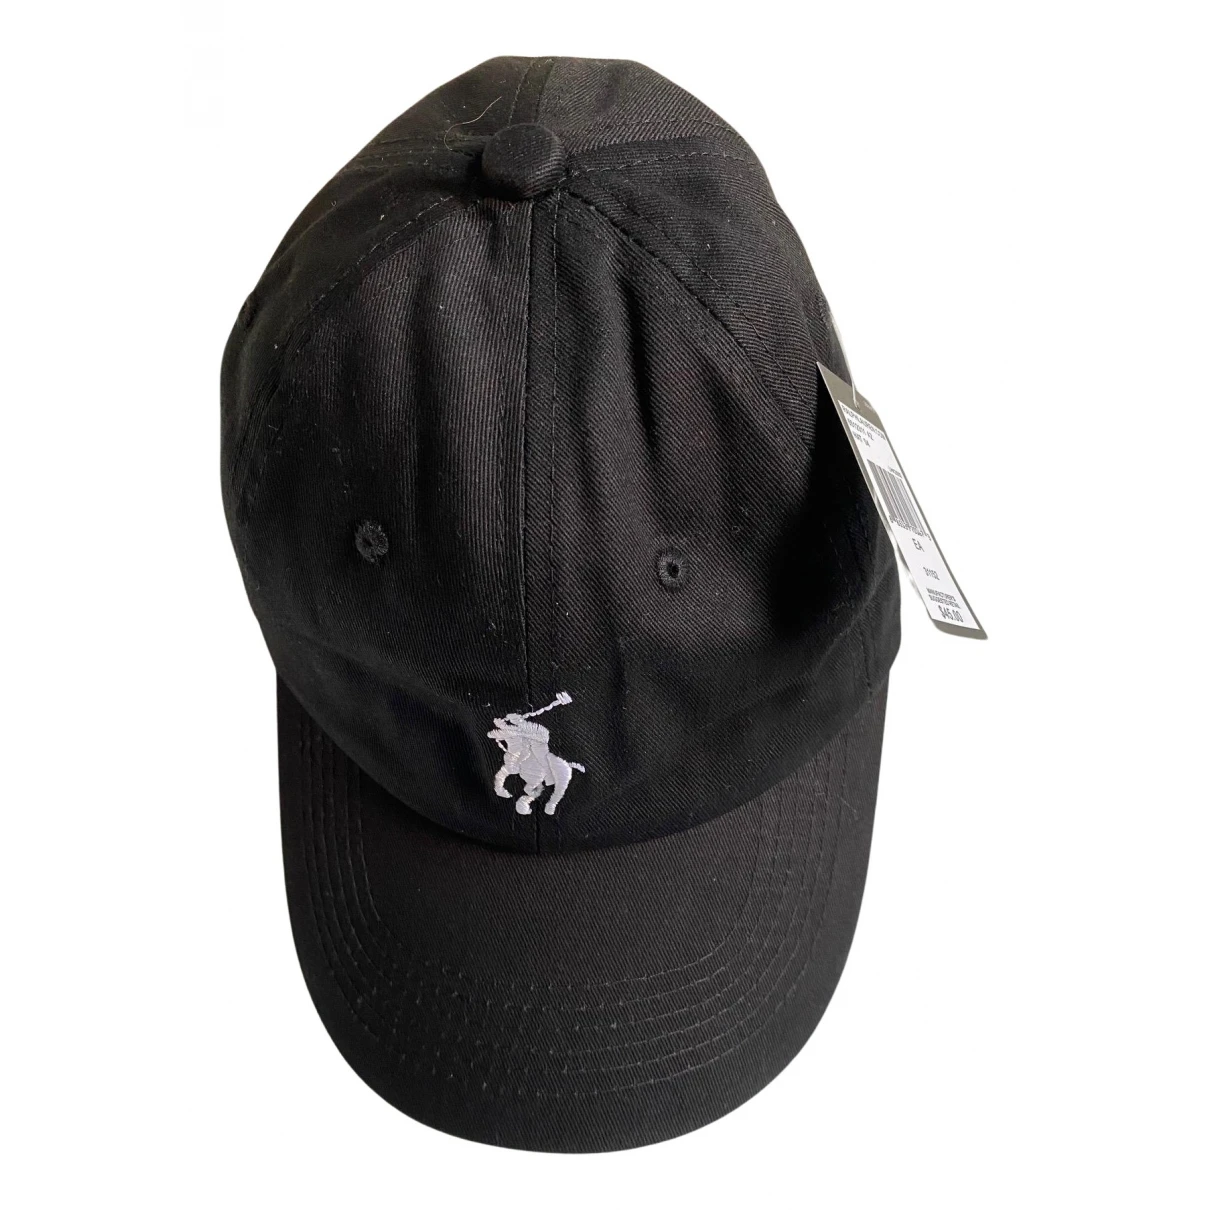 accessories Polo Ralph Lauren hats & pull on hats for Male Cotton M International. Used condition